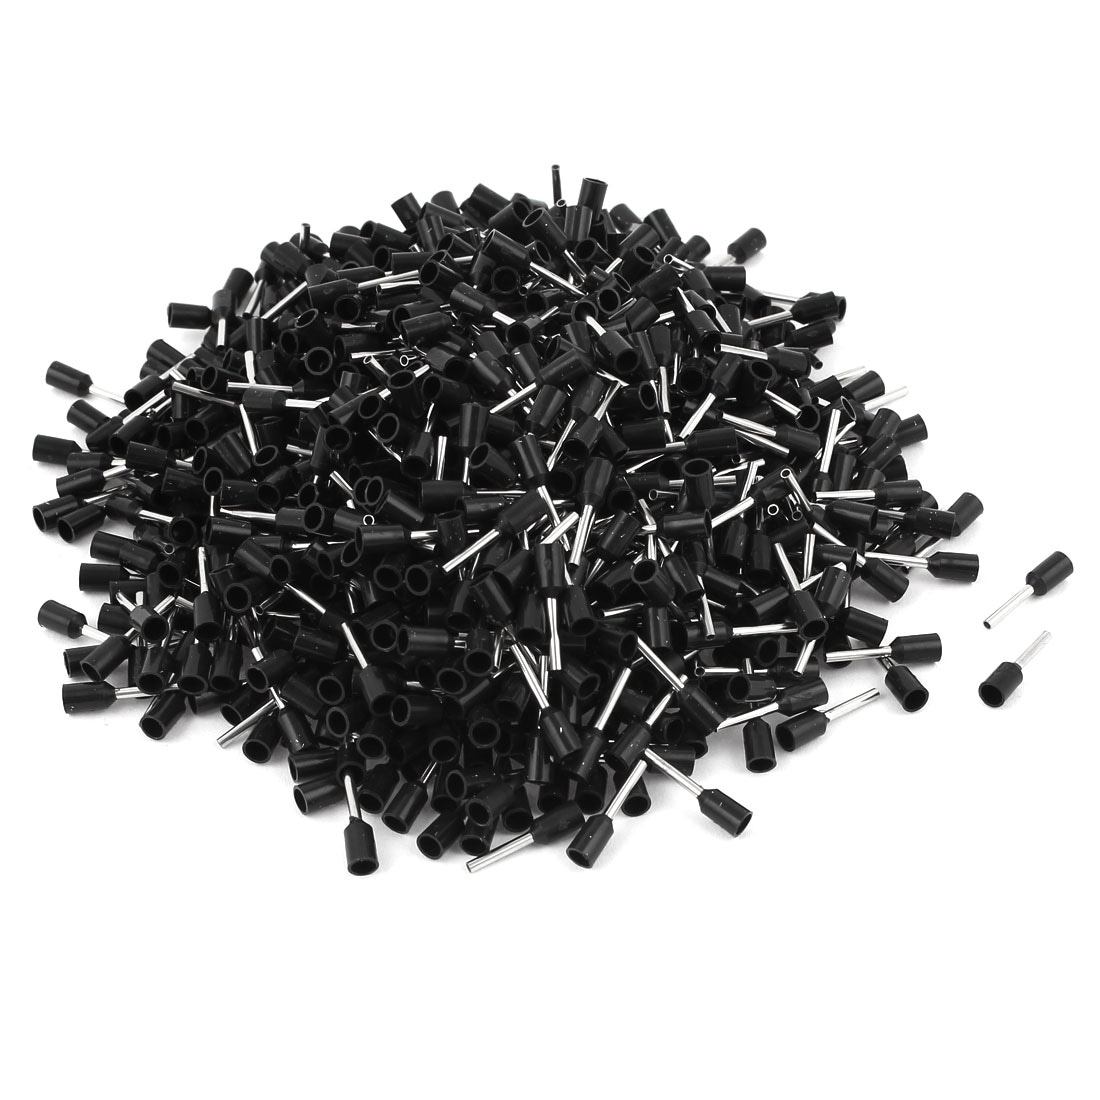 1000Pcs Black Wire Crimp Connector Insulated Ferrule Pin Cord End Terminal AWG22 - Black, Silver Tone